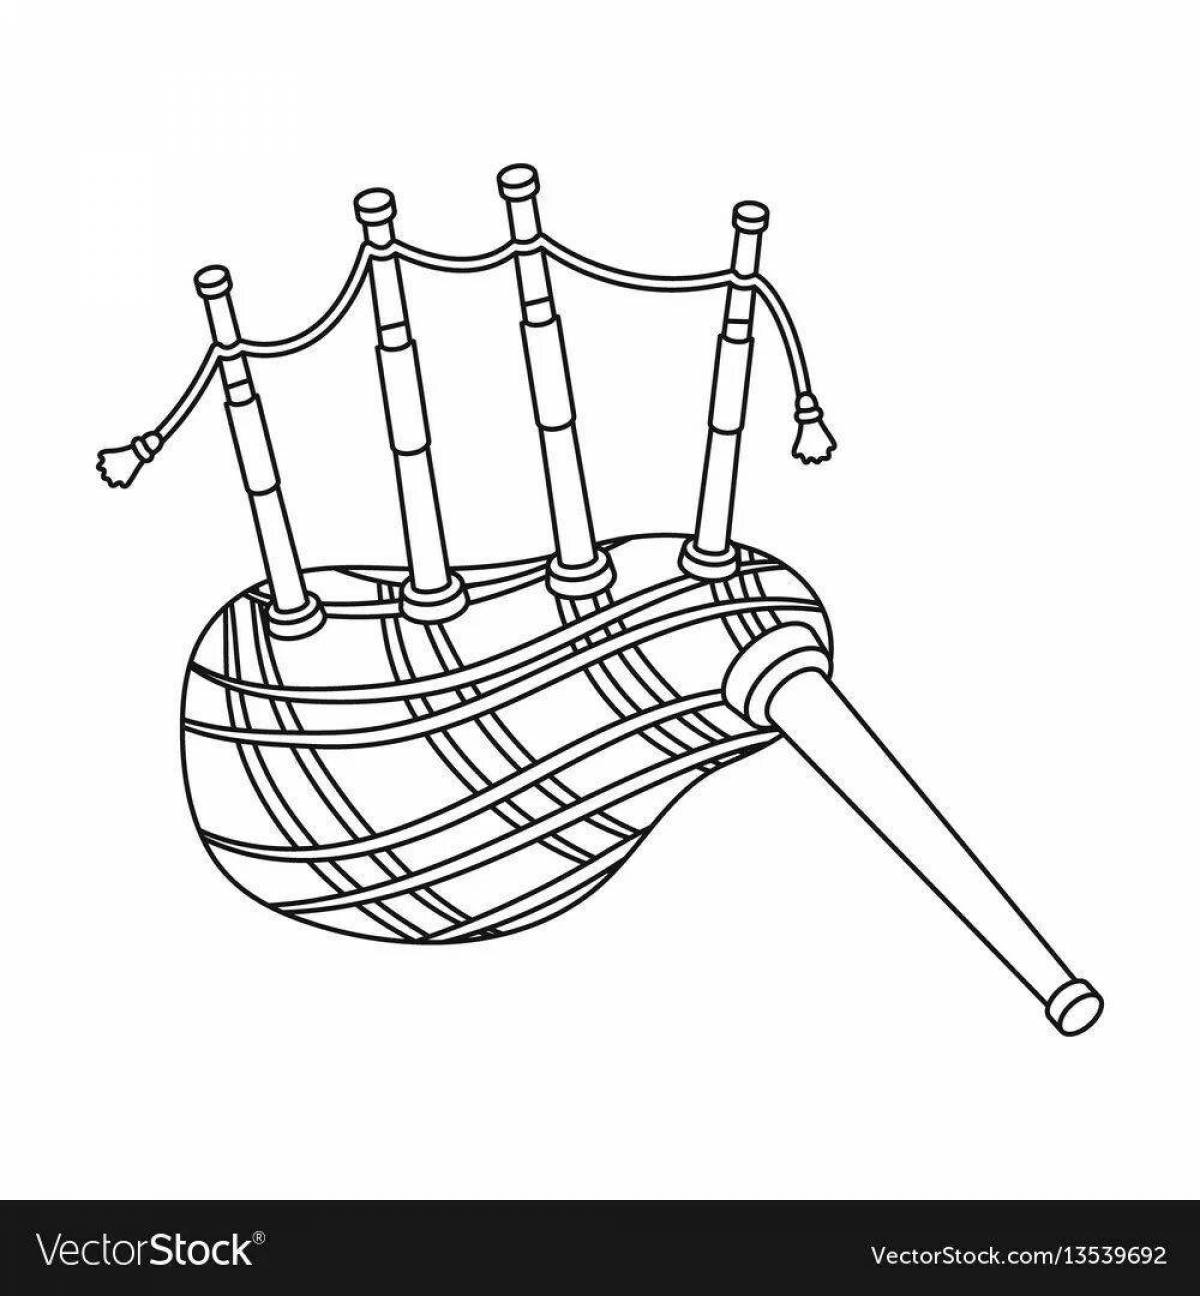 Violent bagpipe coloring page